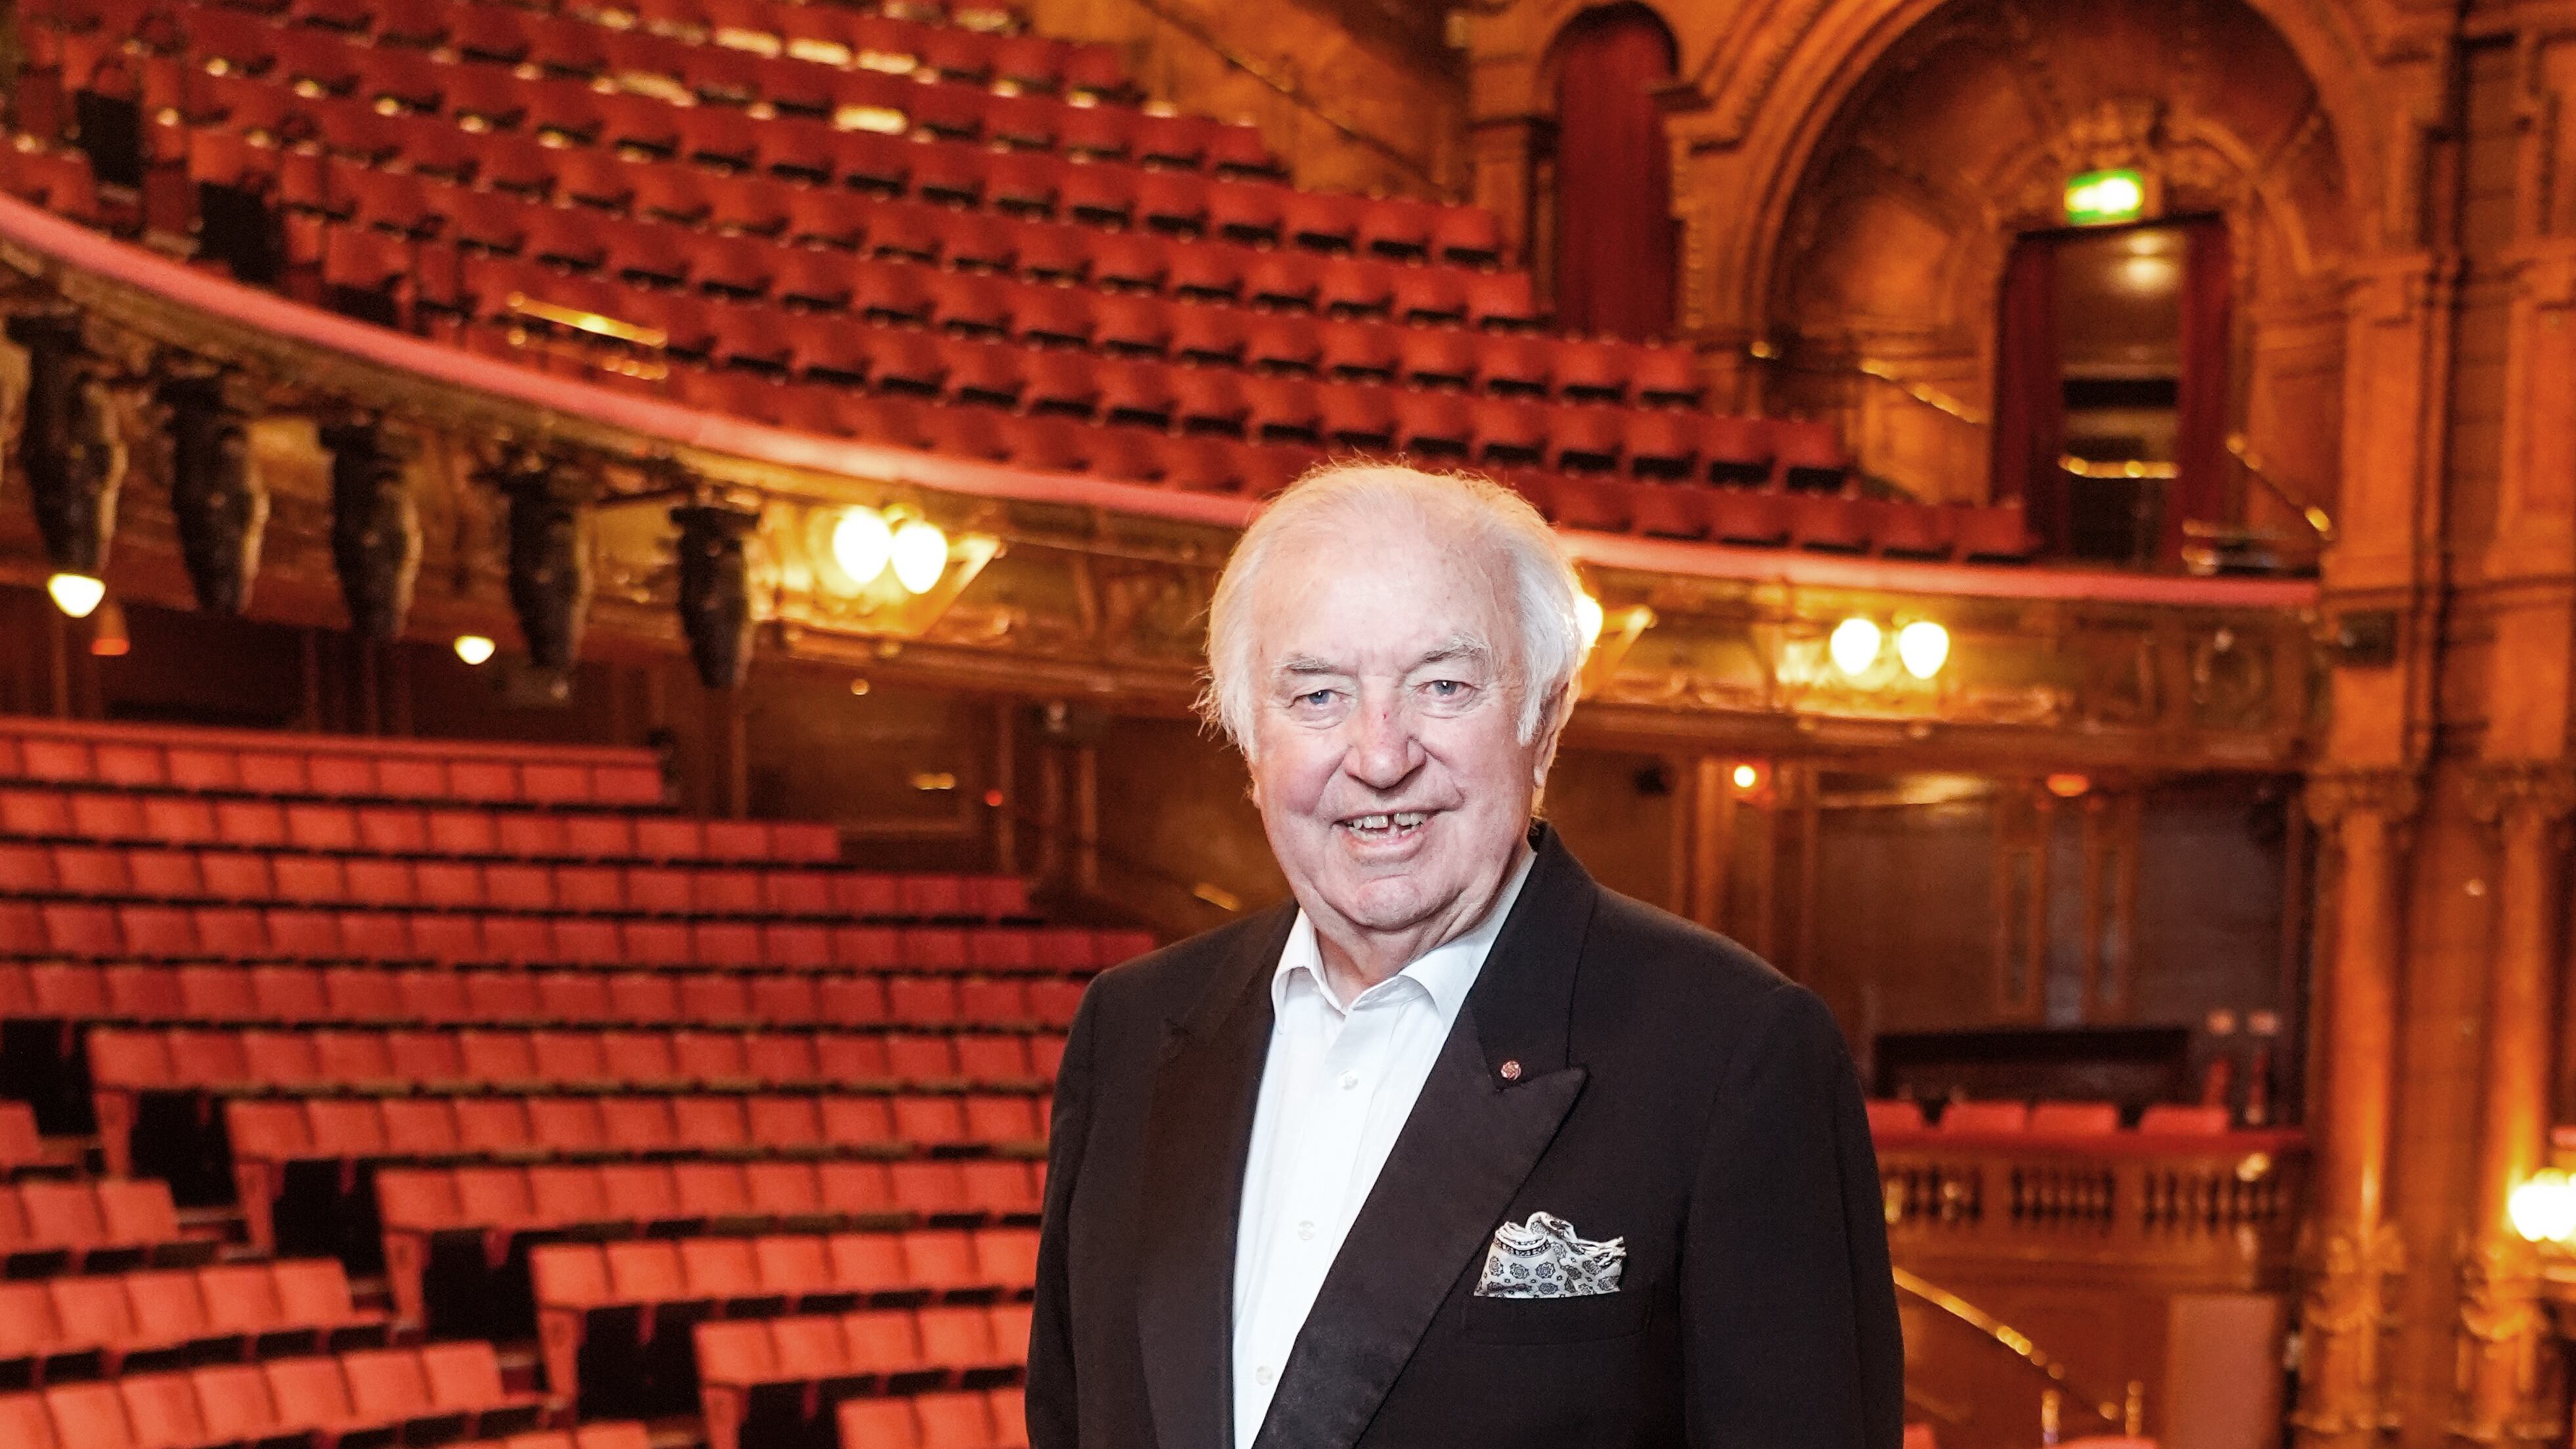 Comedian Jimmy Tarbuck at The London Palladium before appearing on Barry Manilow’s UK tour, including dates at the venue